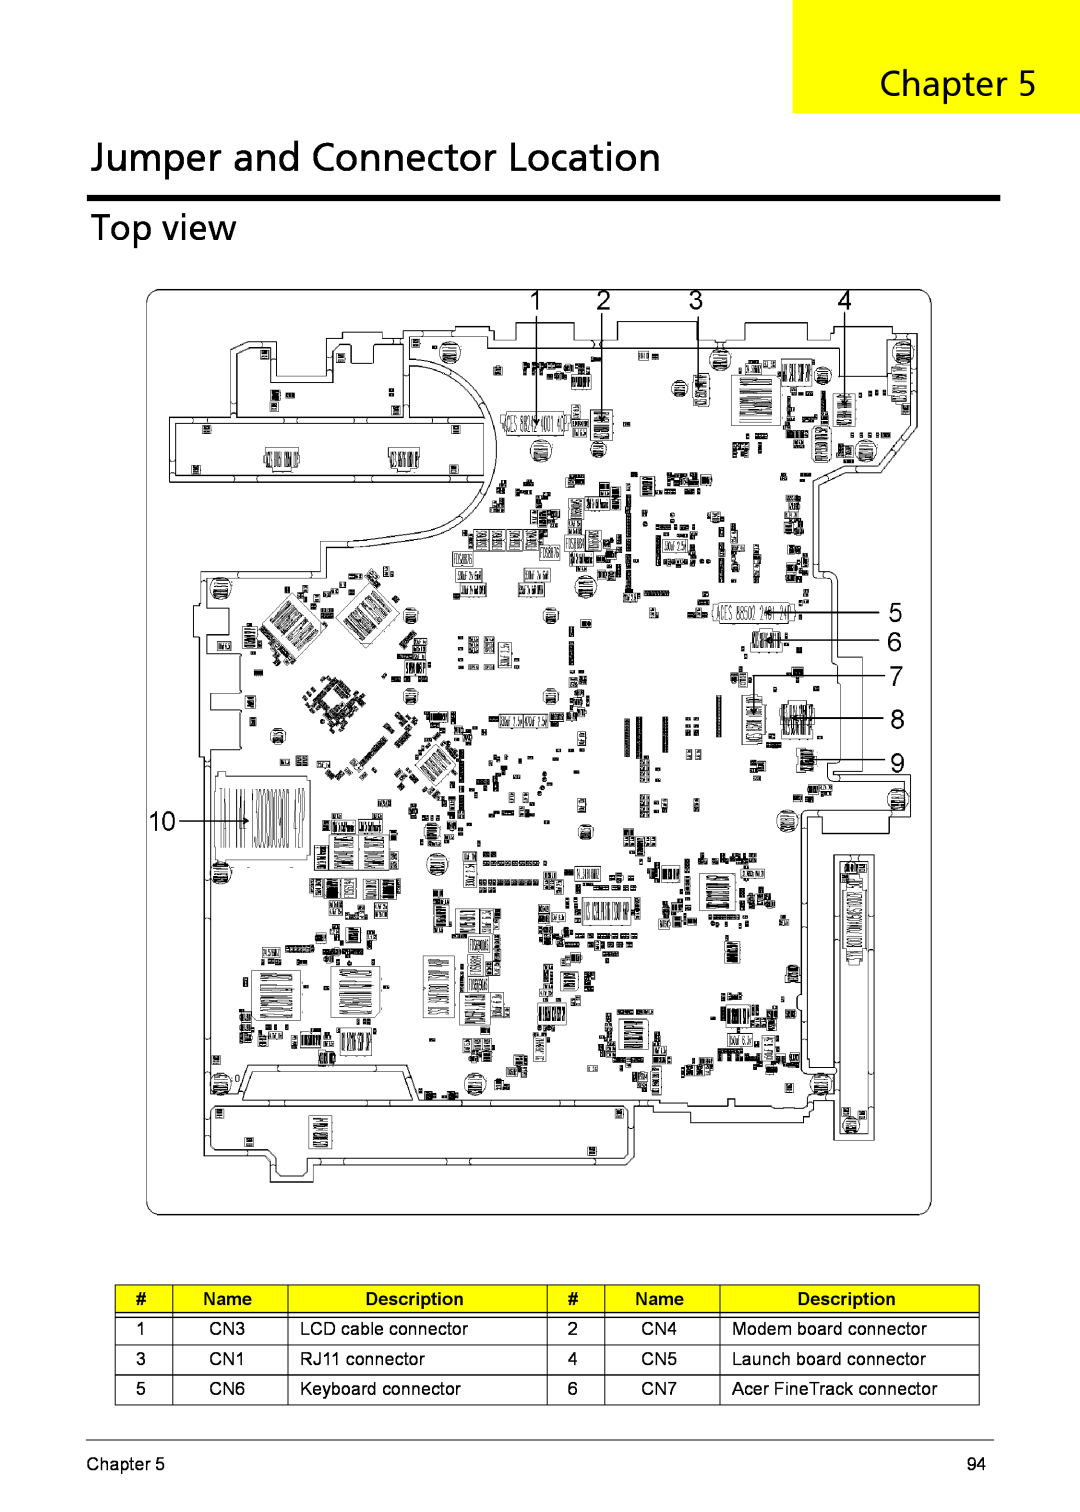 Acer 6410, 6460 manual Jumper and Connector Location, Top view, Name, Chapter, Description 